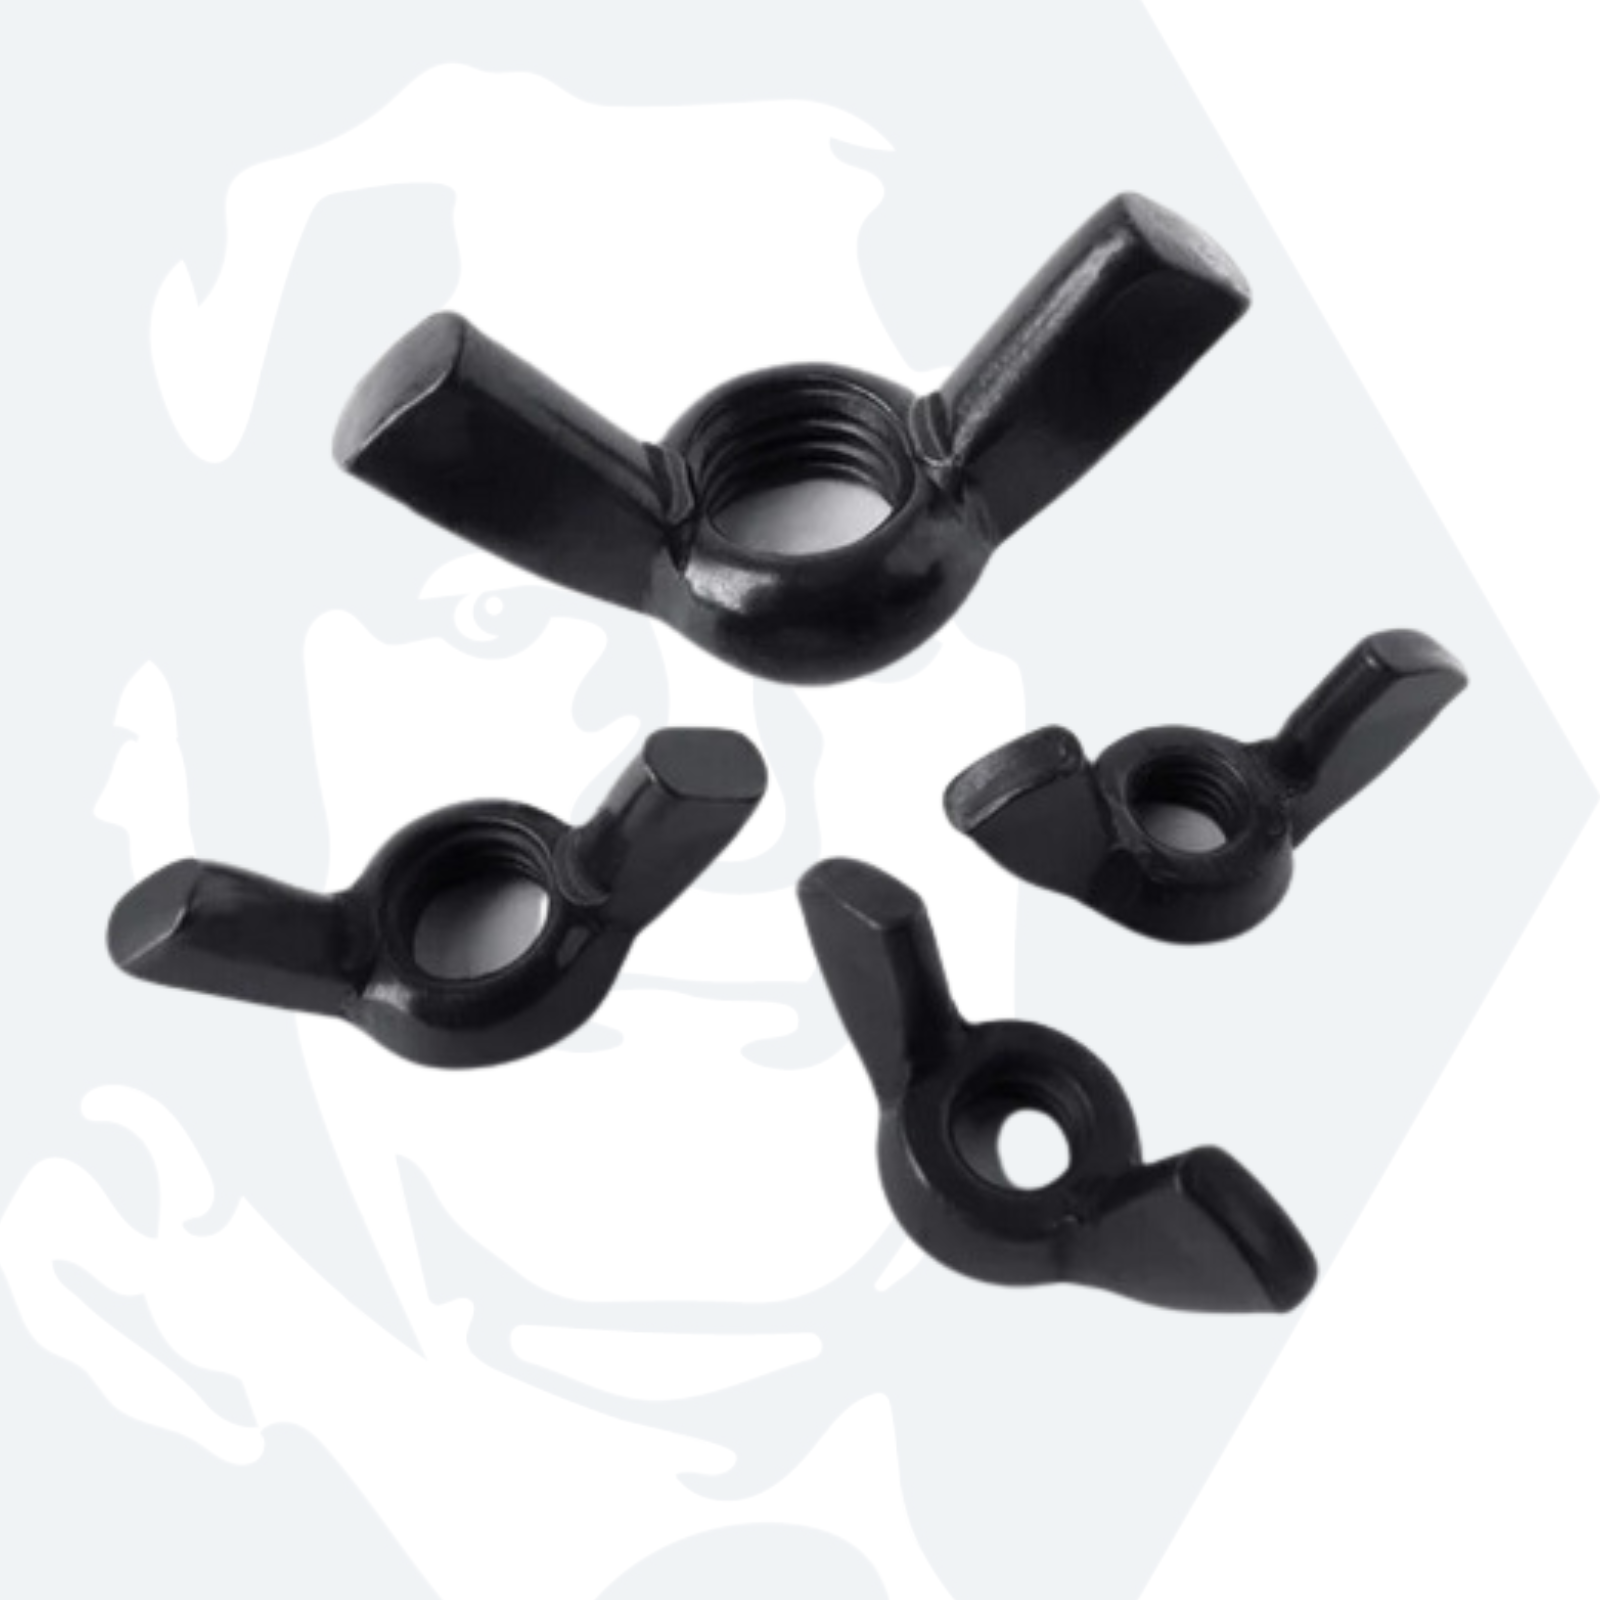 M3 Wing Nut (DIN 315) - Black Stainless Steel (A2)